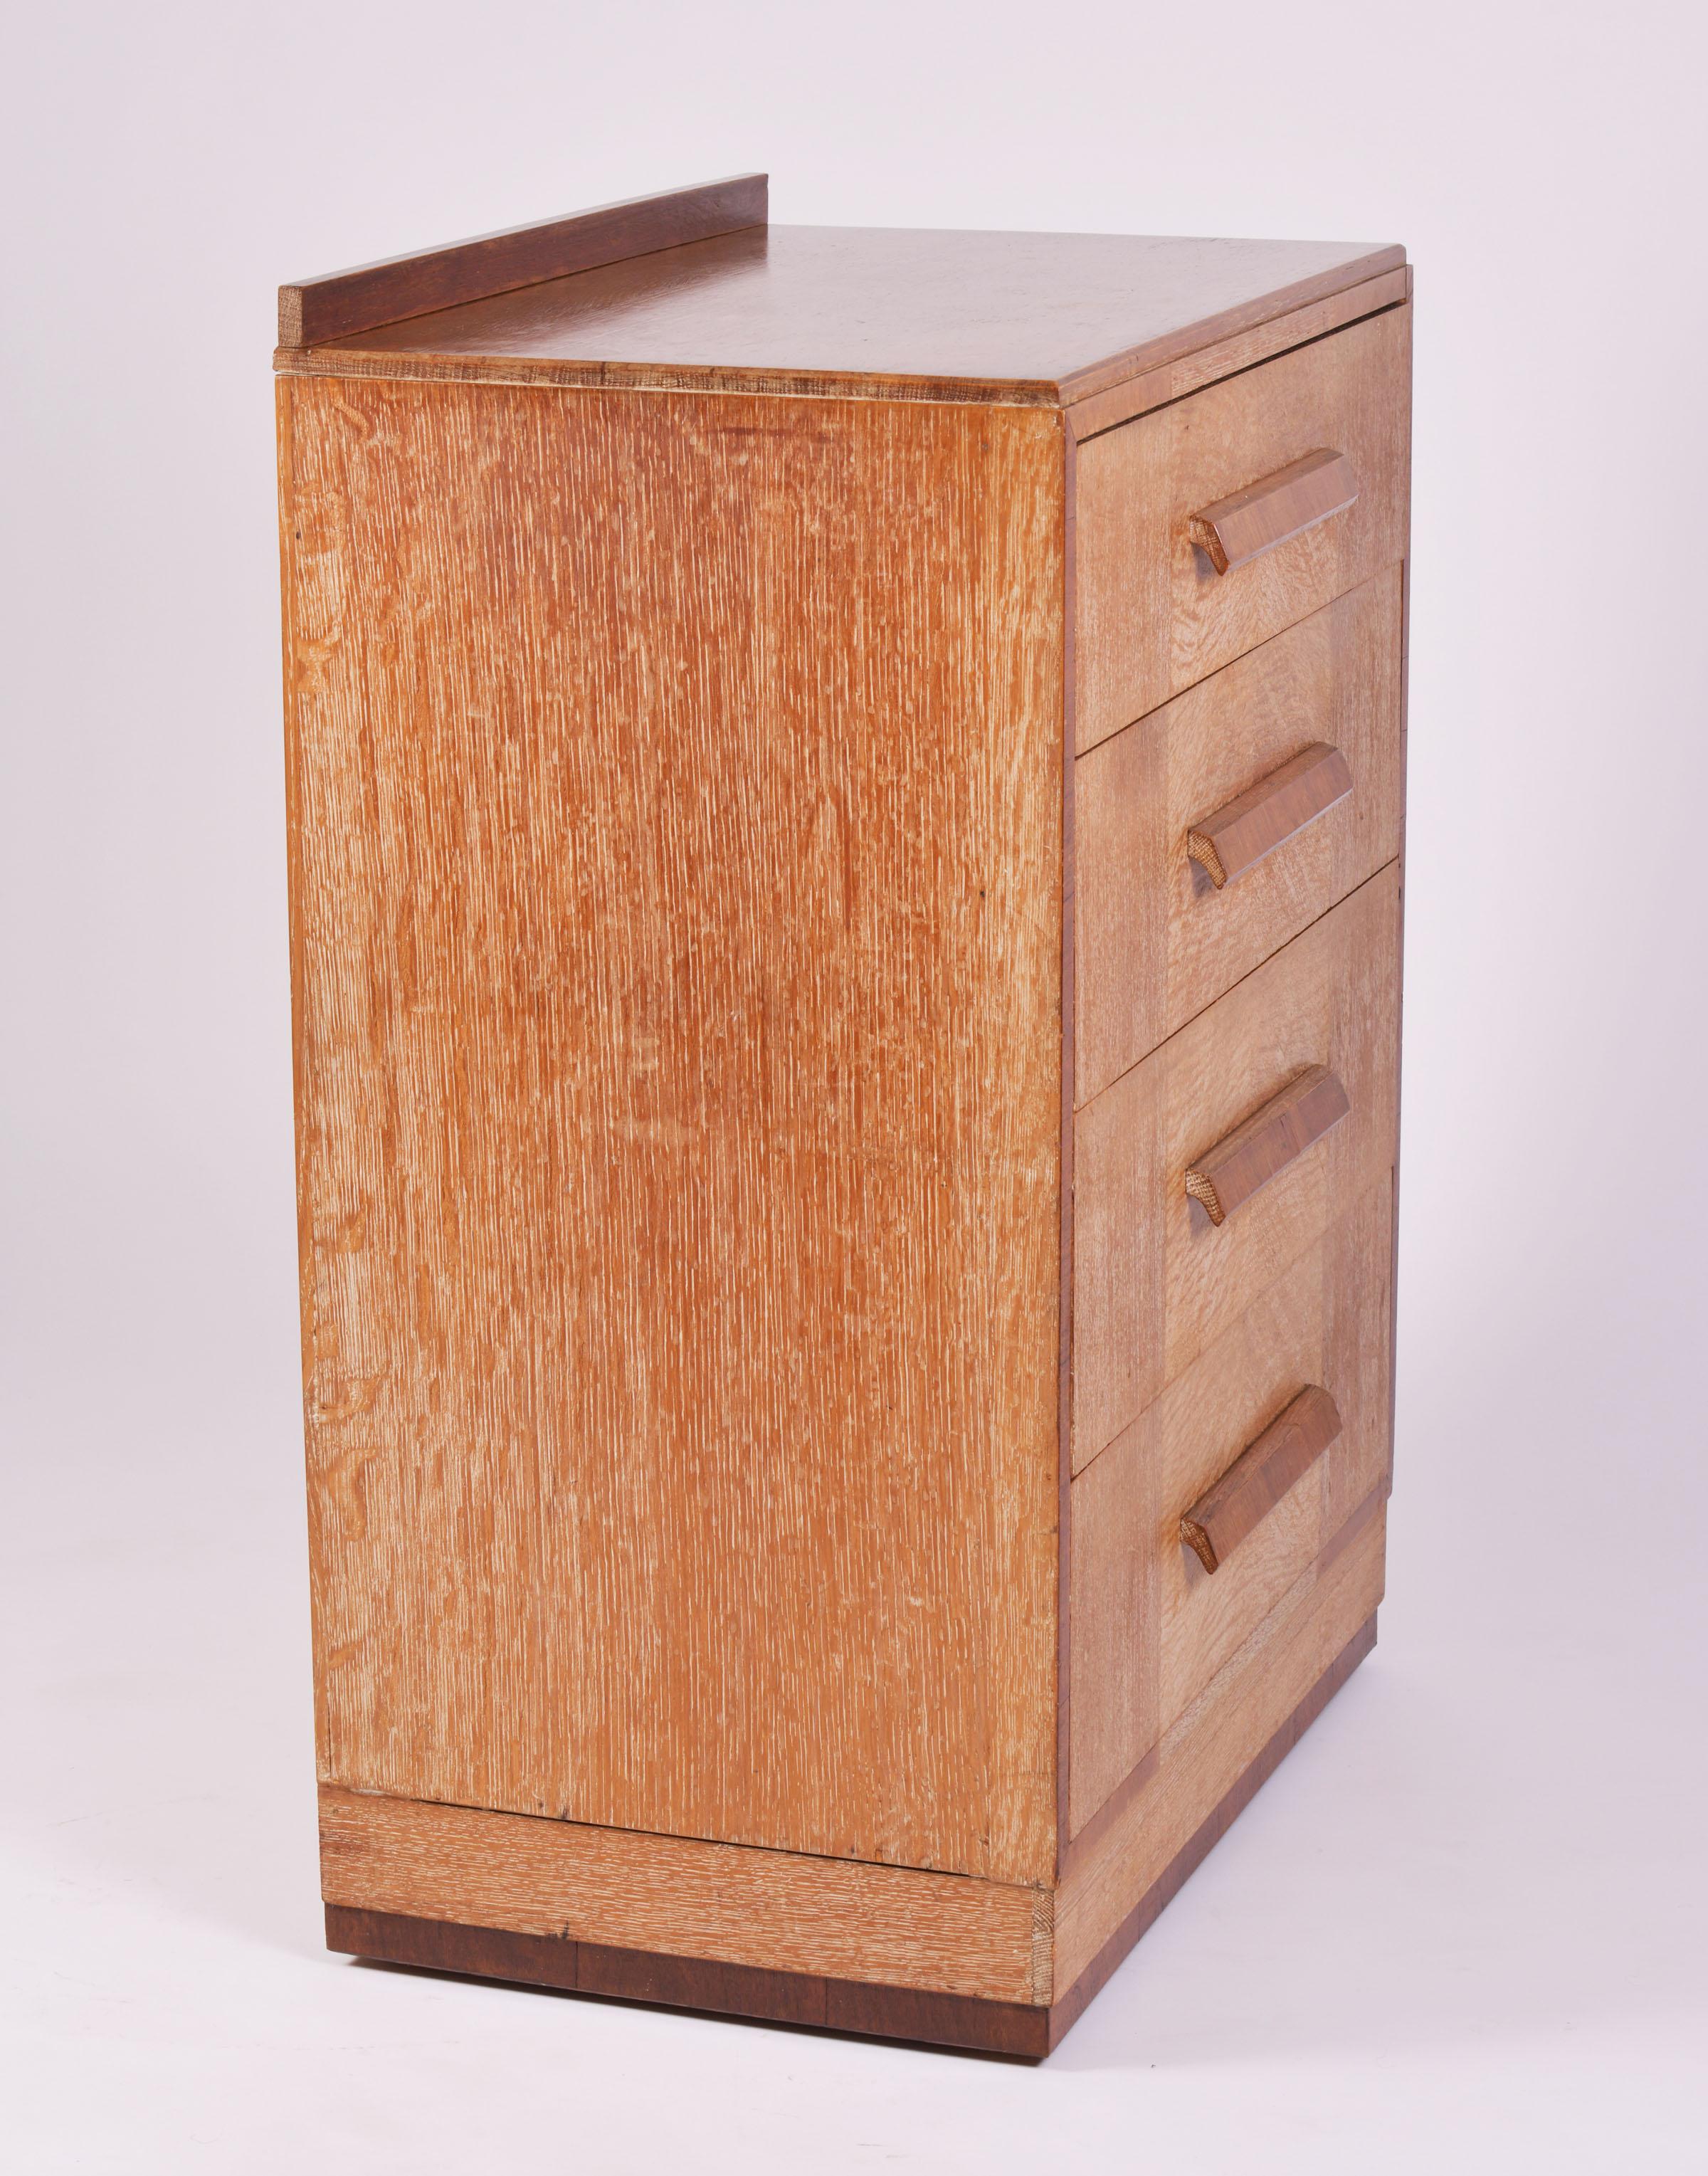 This very stylish and well-proportioned English limed oak chest features four slightly graduating and deep long drawers with large decorative wooden pull handles. It measures 27 1/8 in – 69 cm wide, 17 in – 43.2 cm deep and 35 ½ in – 90 cm in